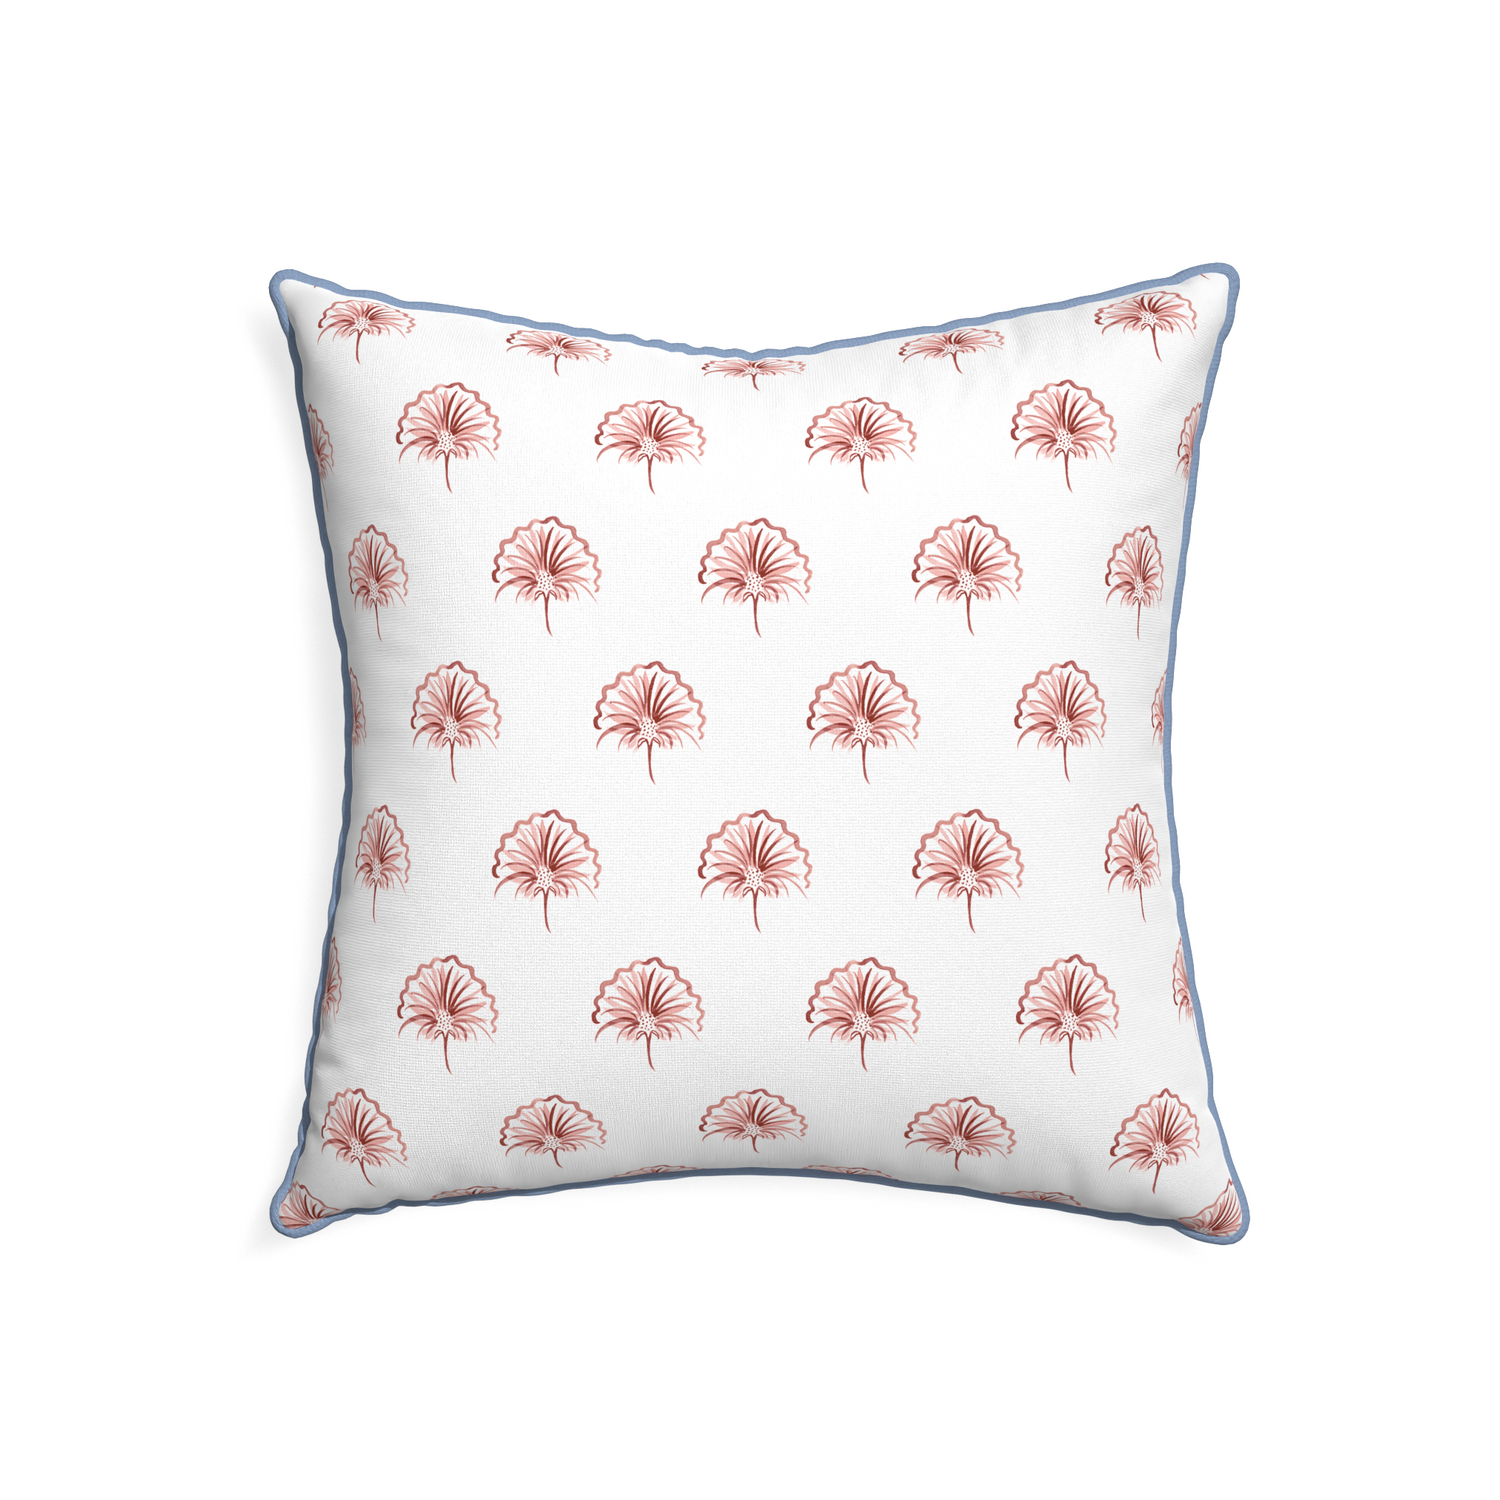 22-square penelope rose custom floral pinkpillow with sky piping on white background